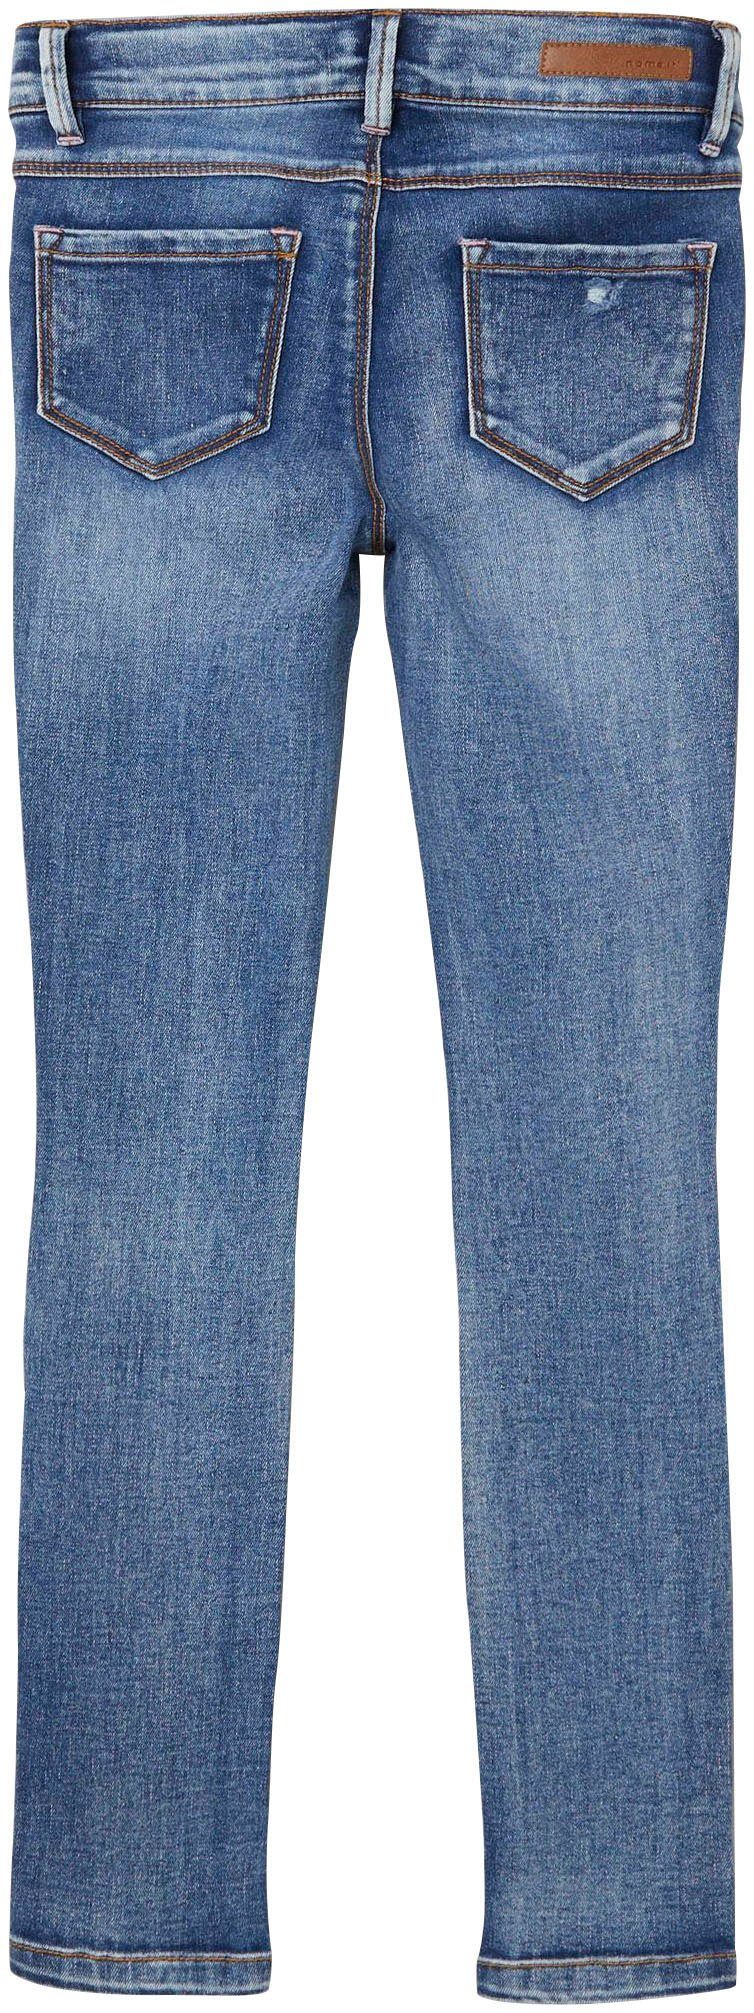 2678 It DNMTONSON NKFPOLLY Stretch-Jeans PANT Name